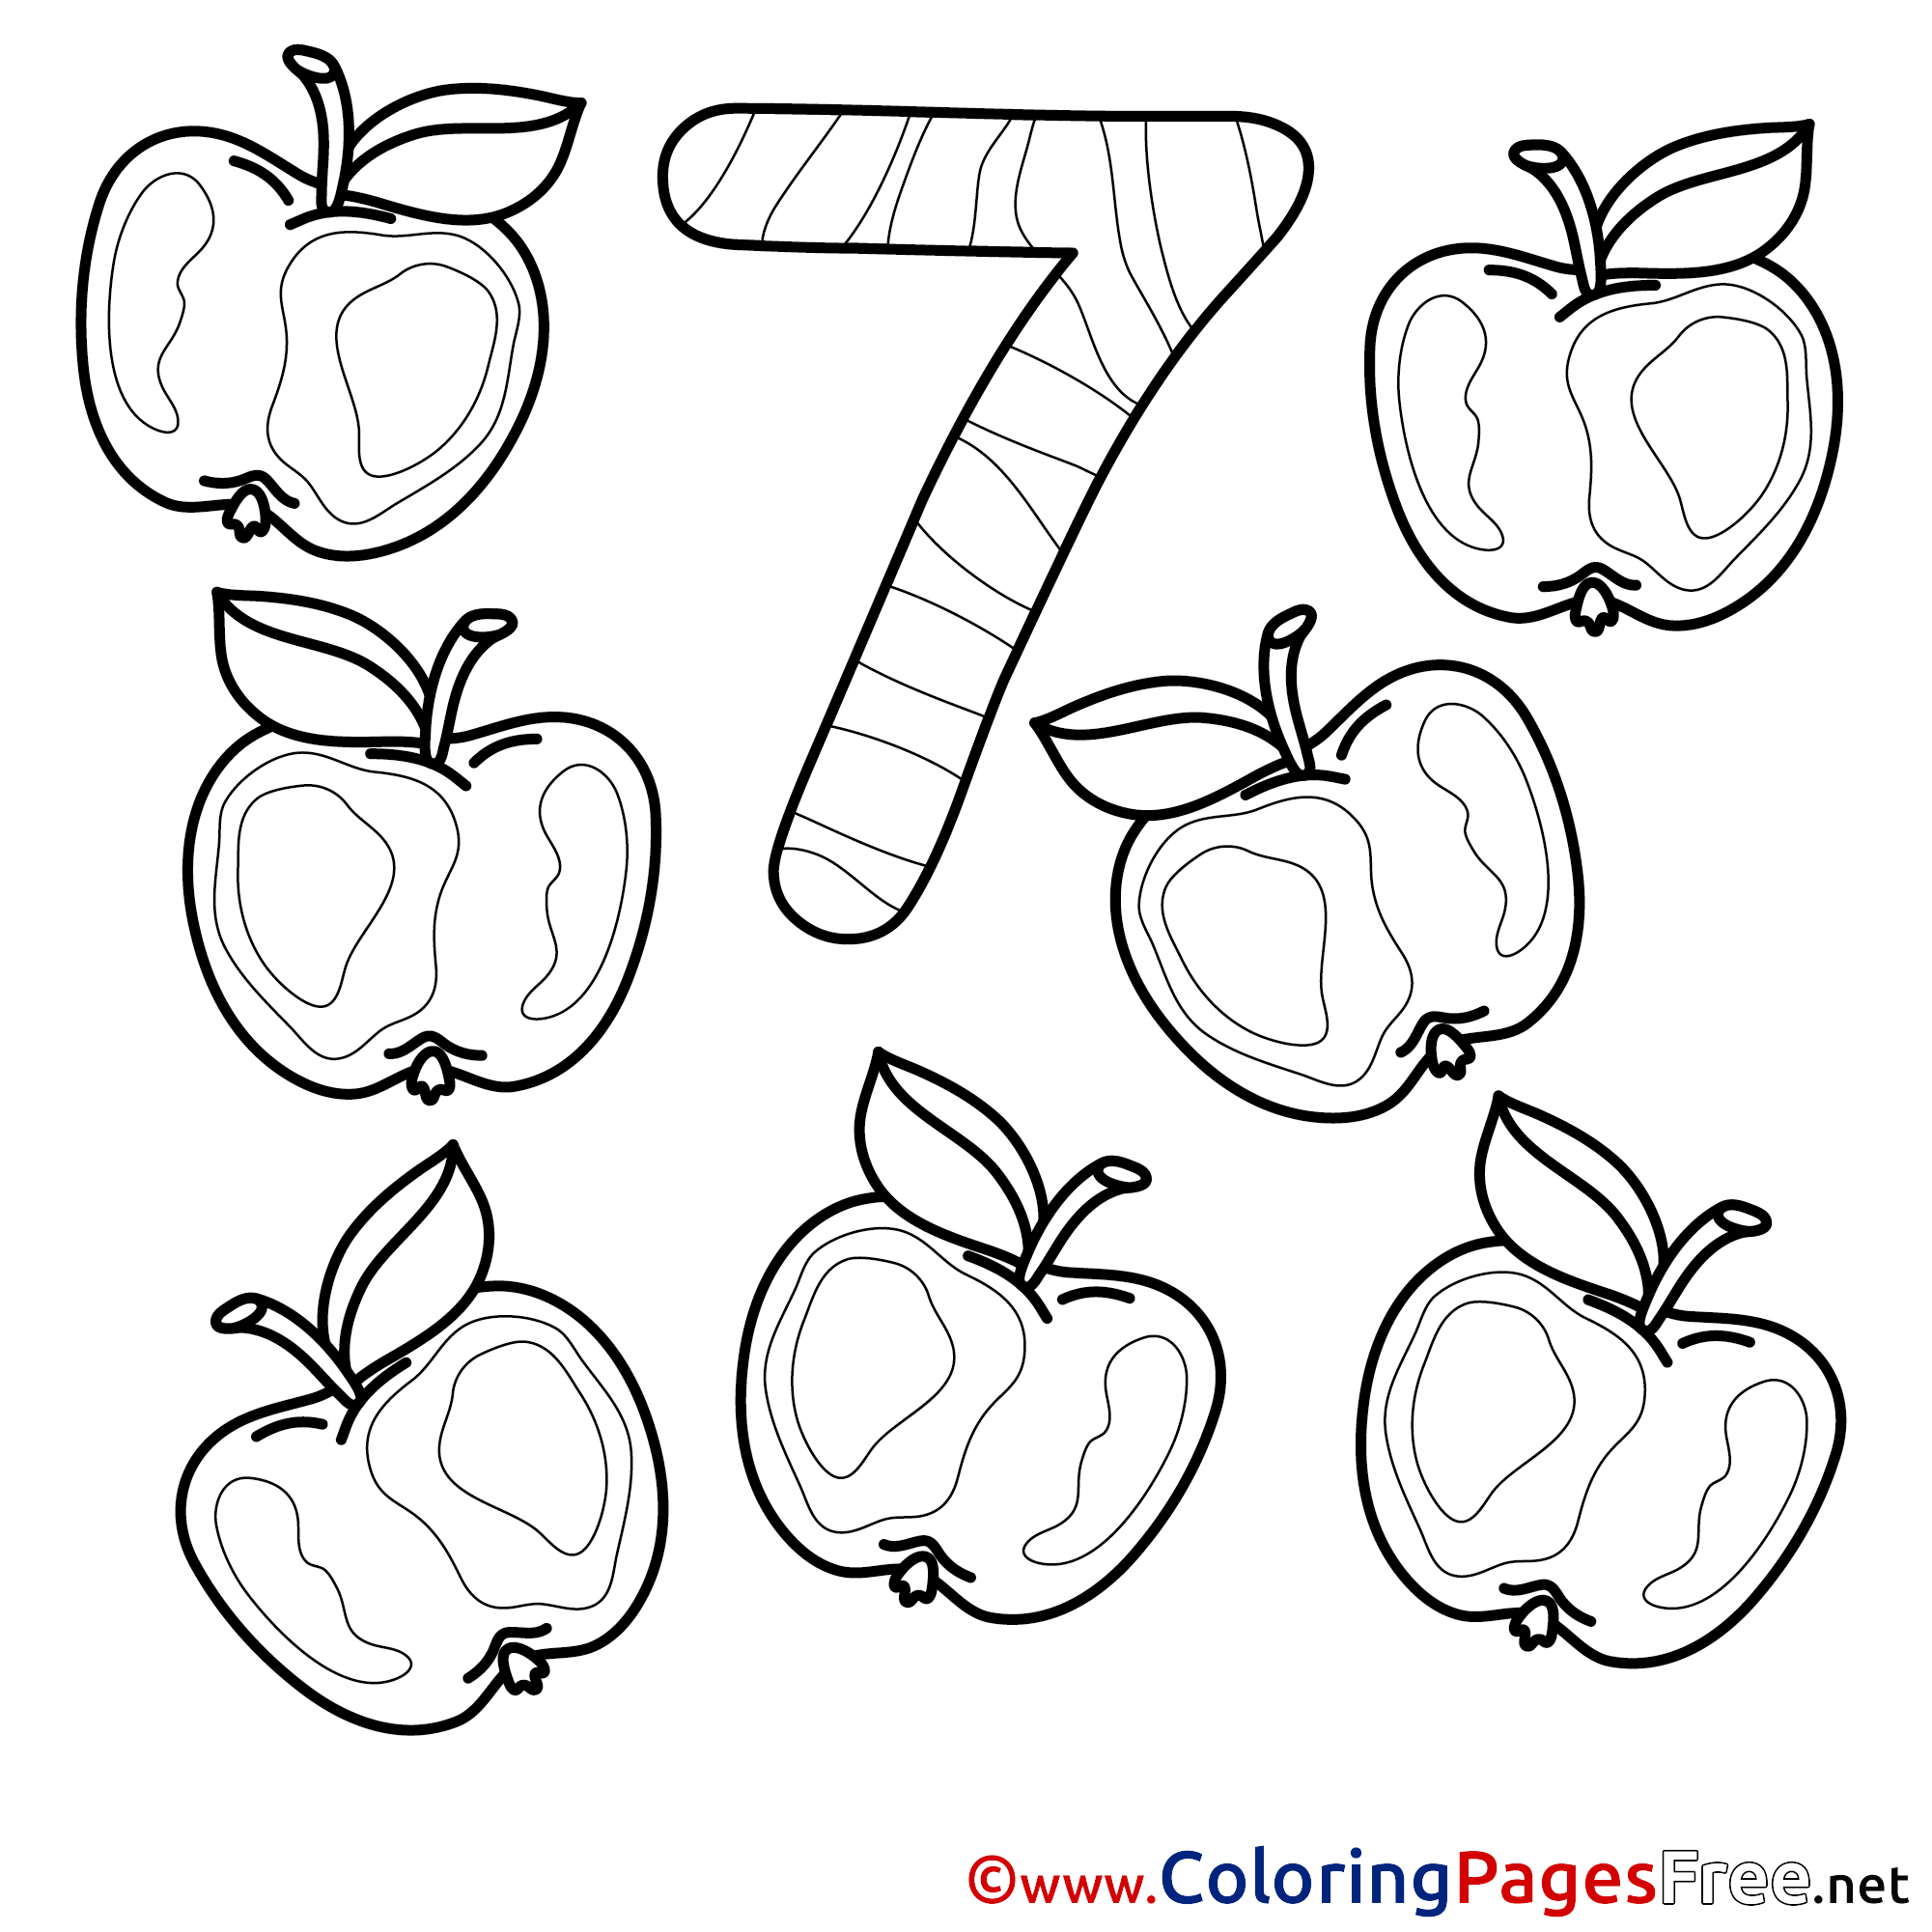 Number 7 Counting Worksheets